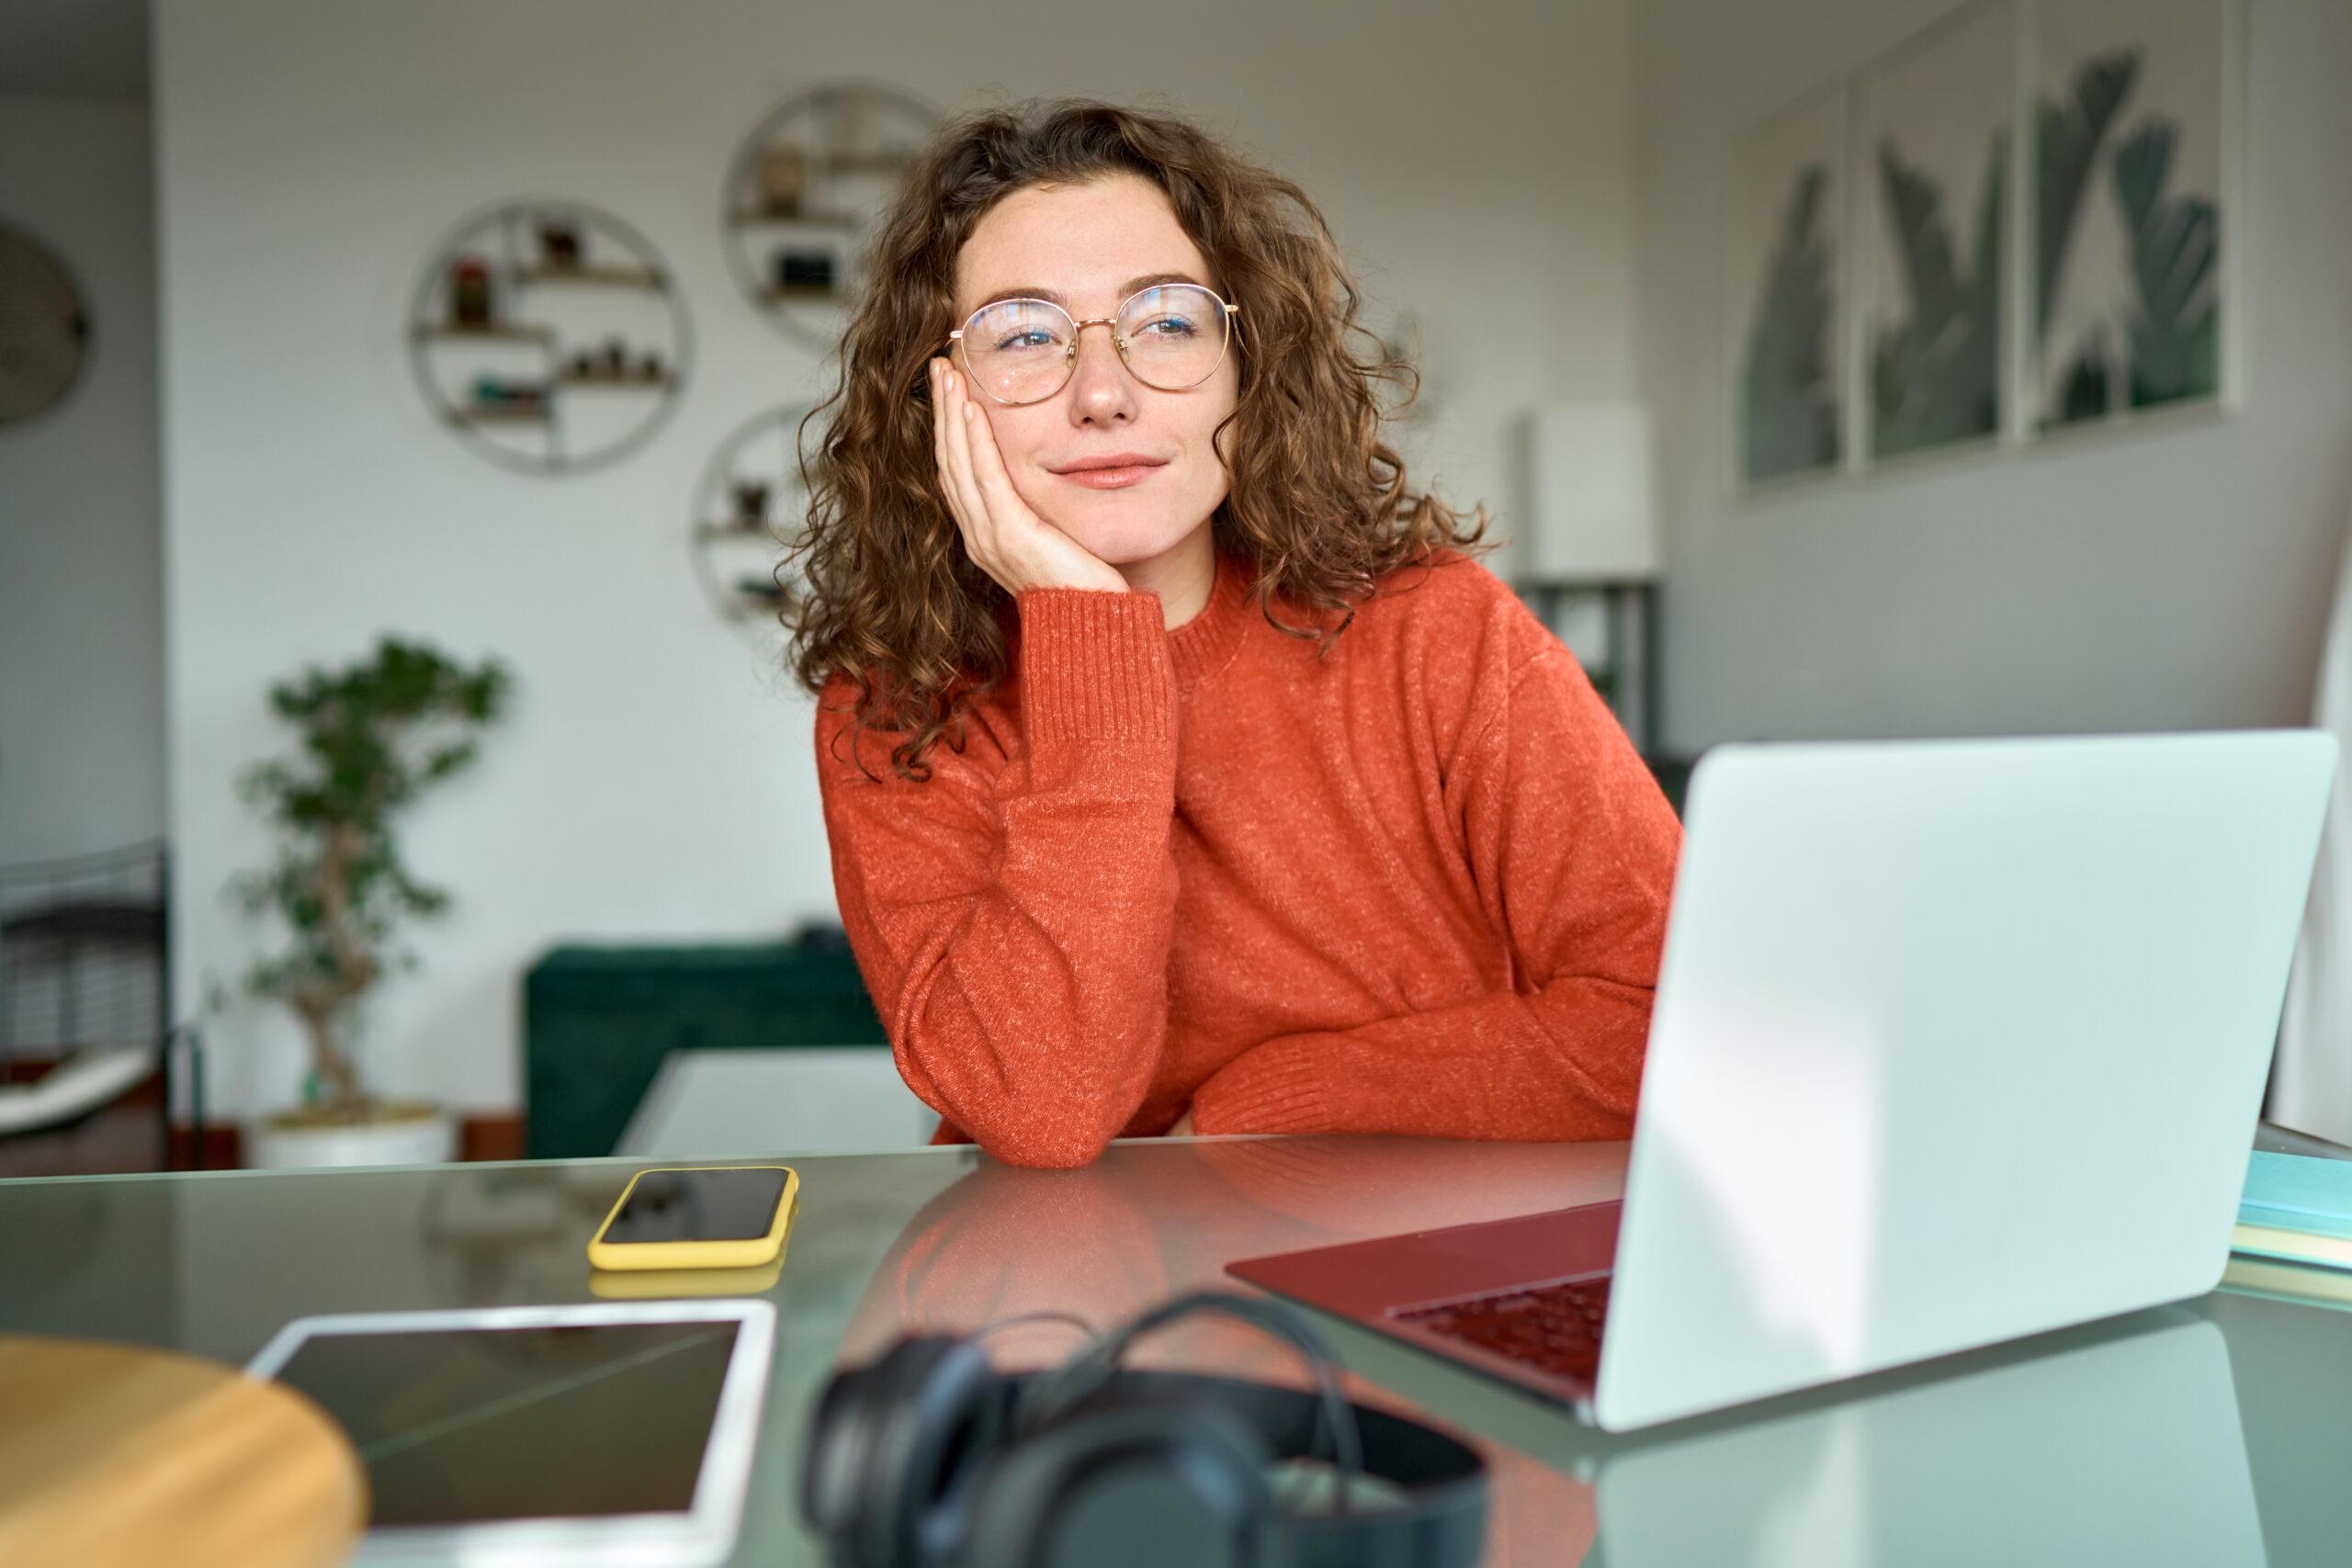 Young woman with glasses and curly hair thinking while working on her laptop at home 